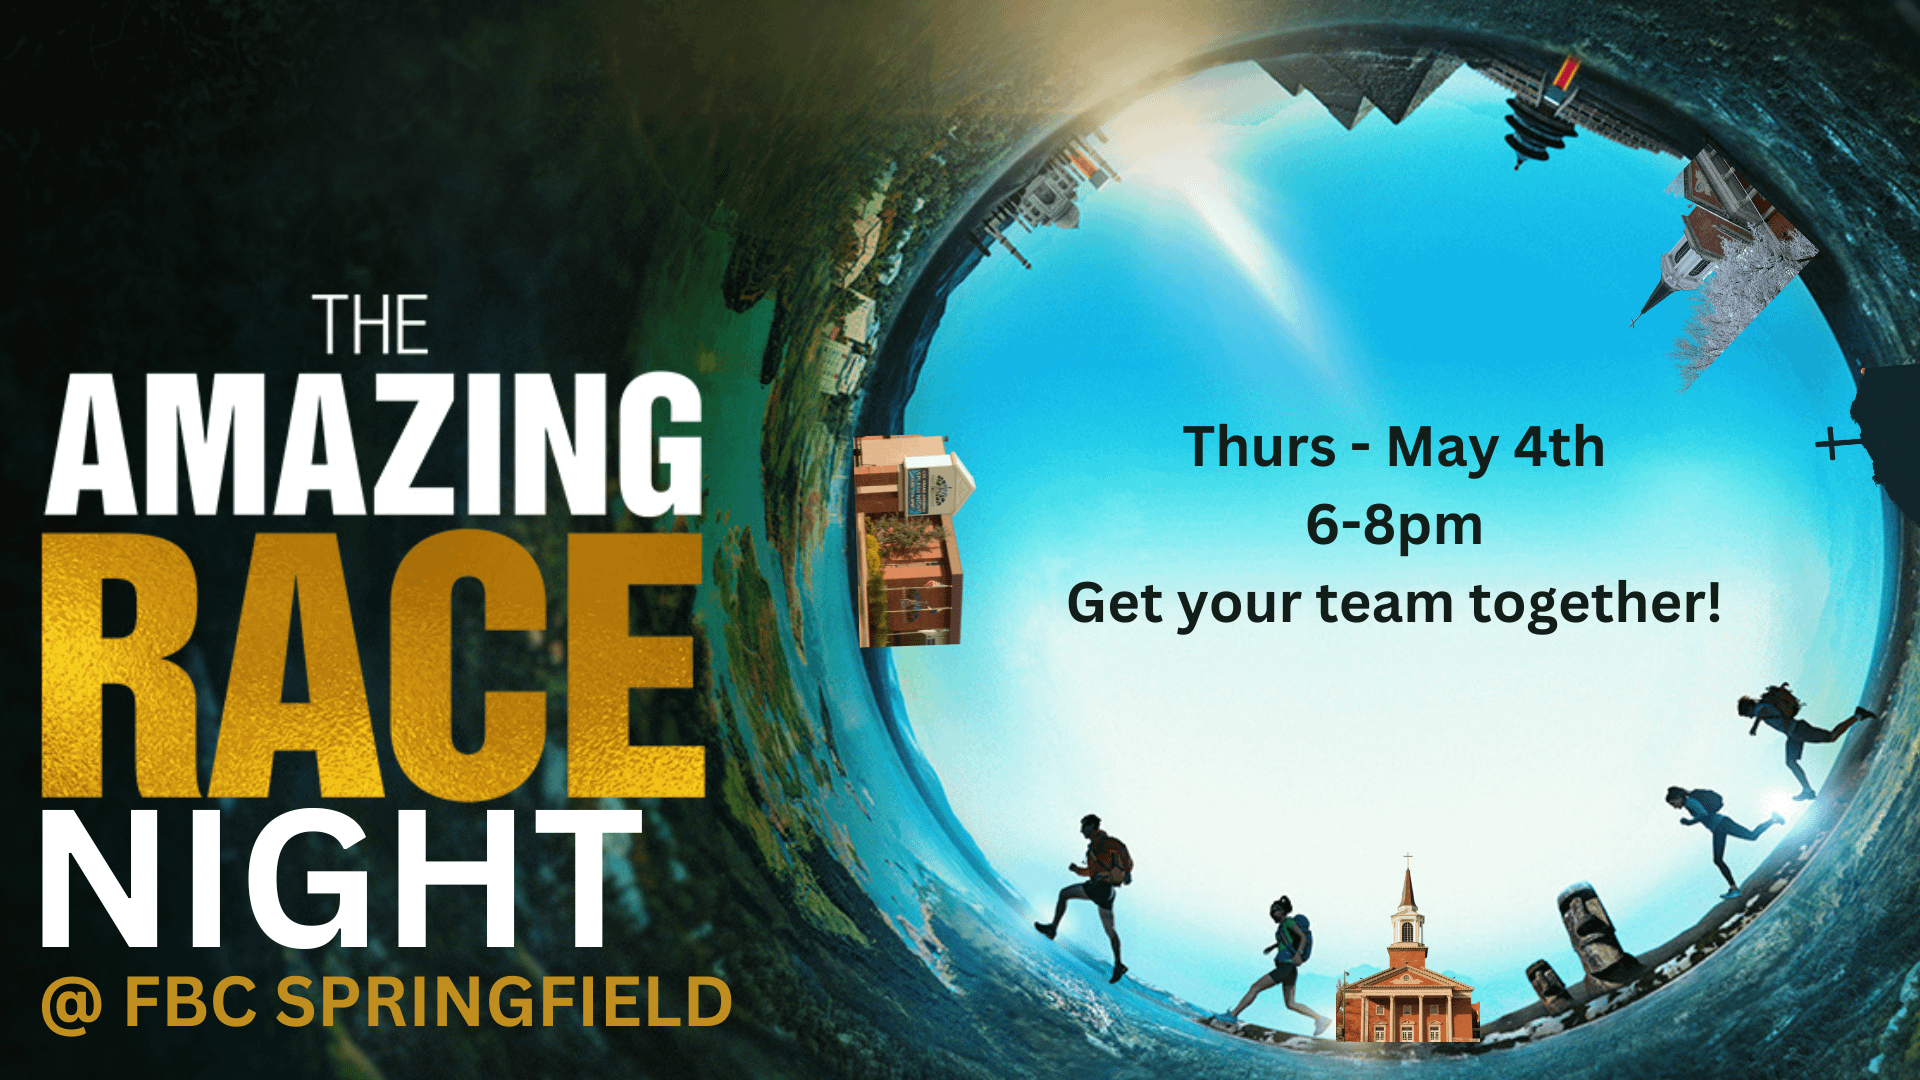 The Amazing Race Night - May 4th from 6 to 8pm